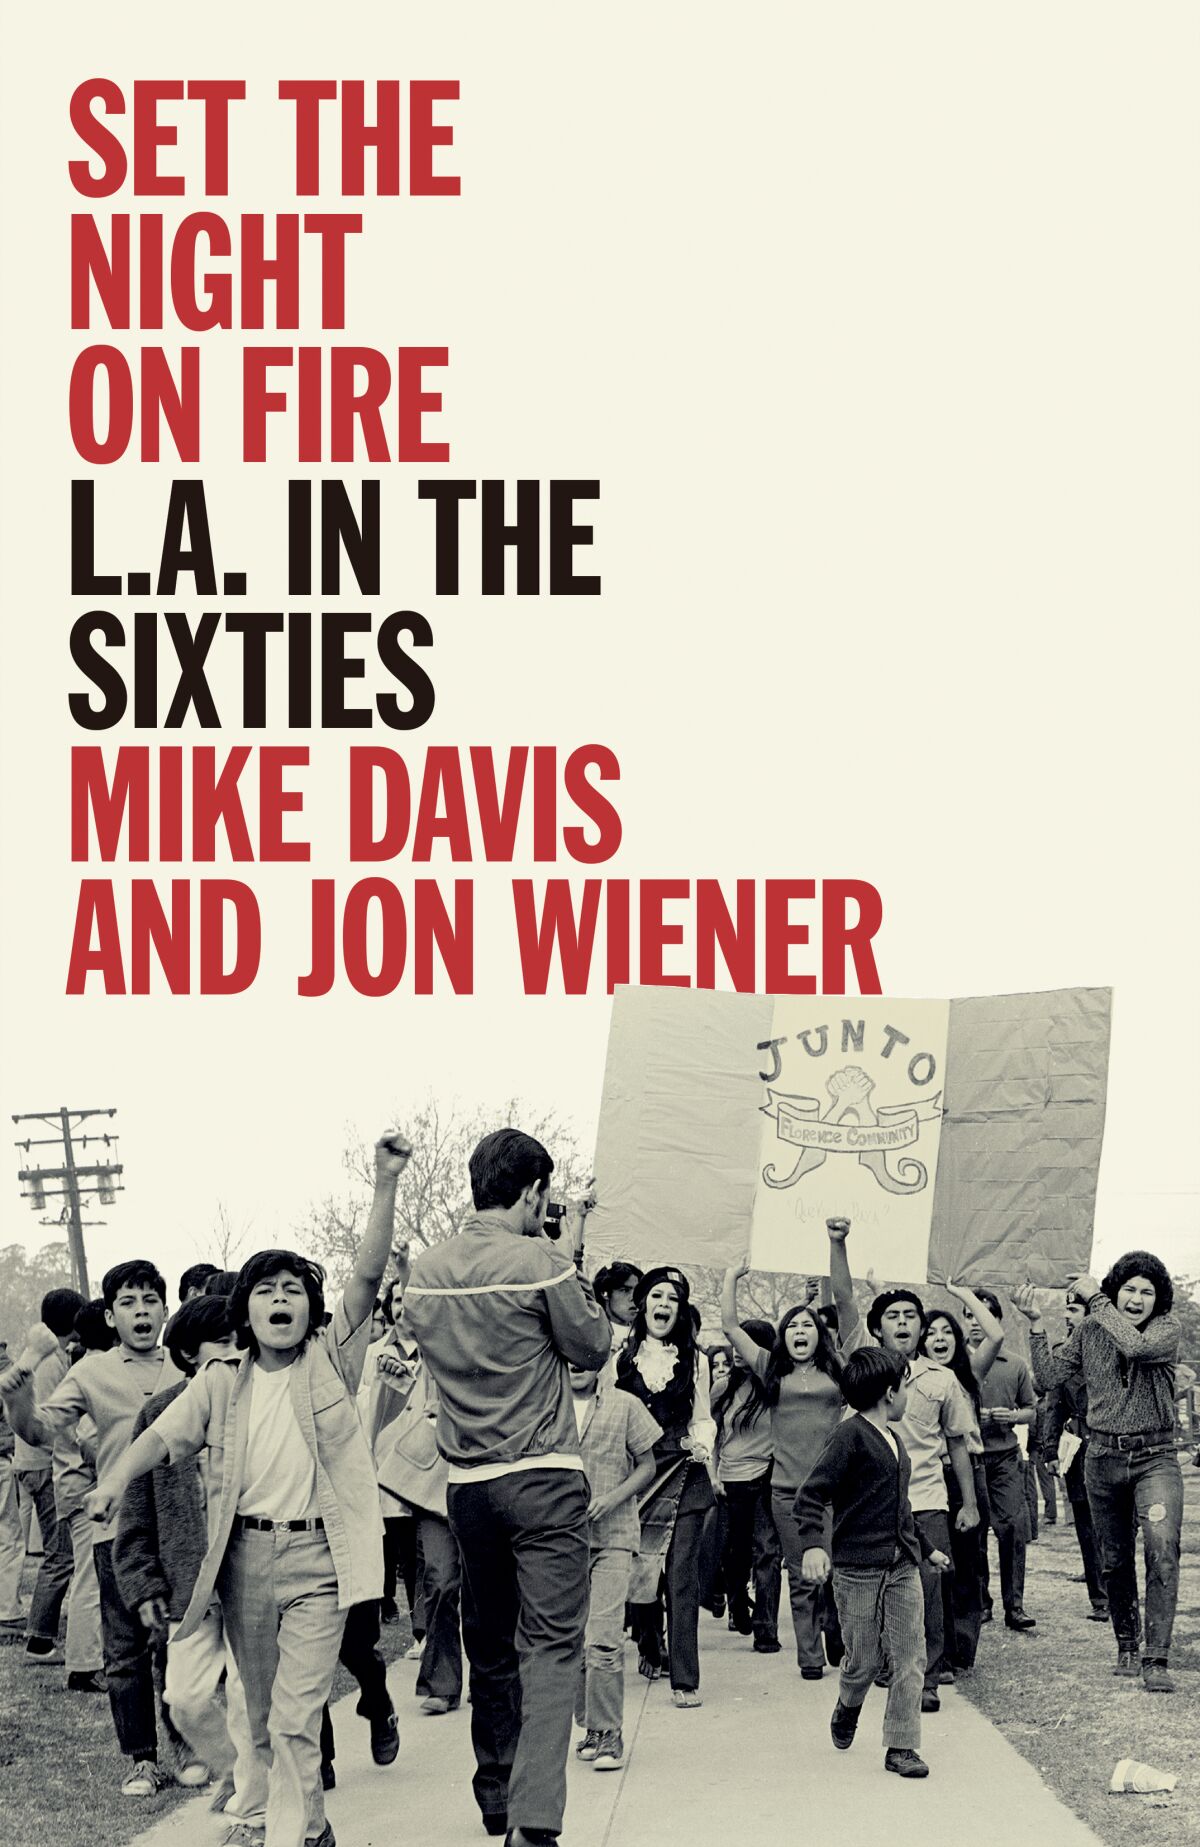 "Set the Night on Fire: L.A. in the Sixties" by Mike Davis and Jon Wiener.